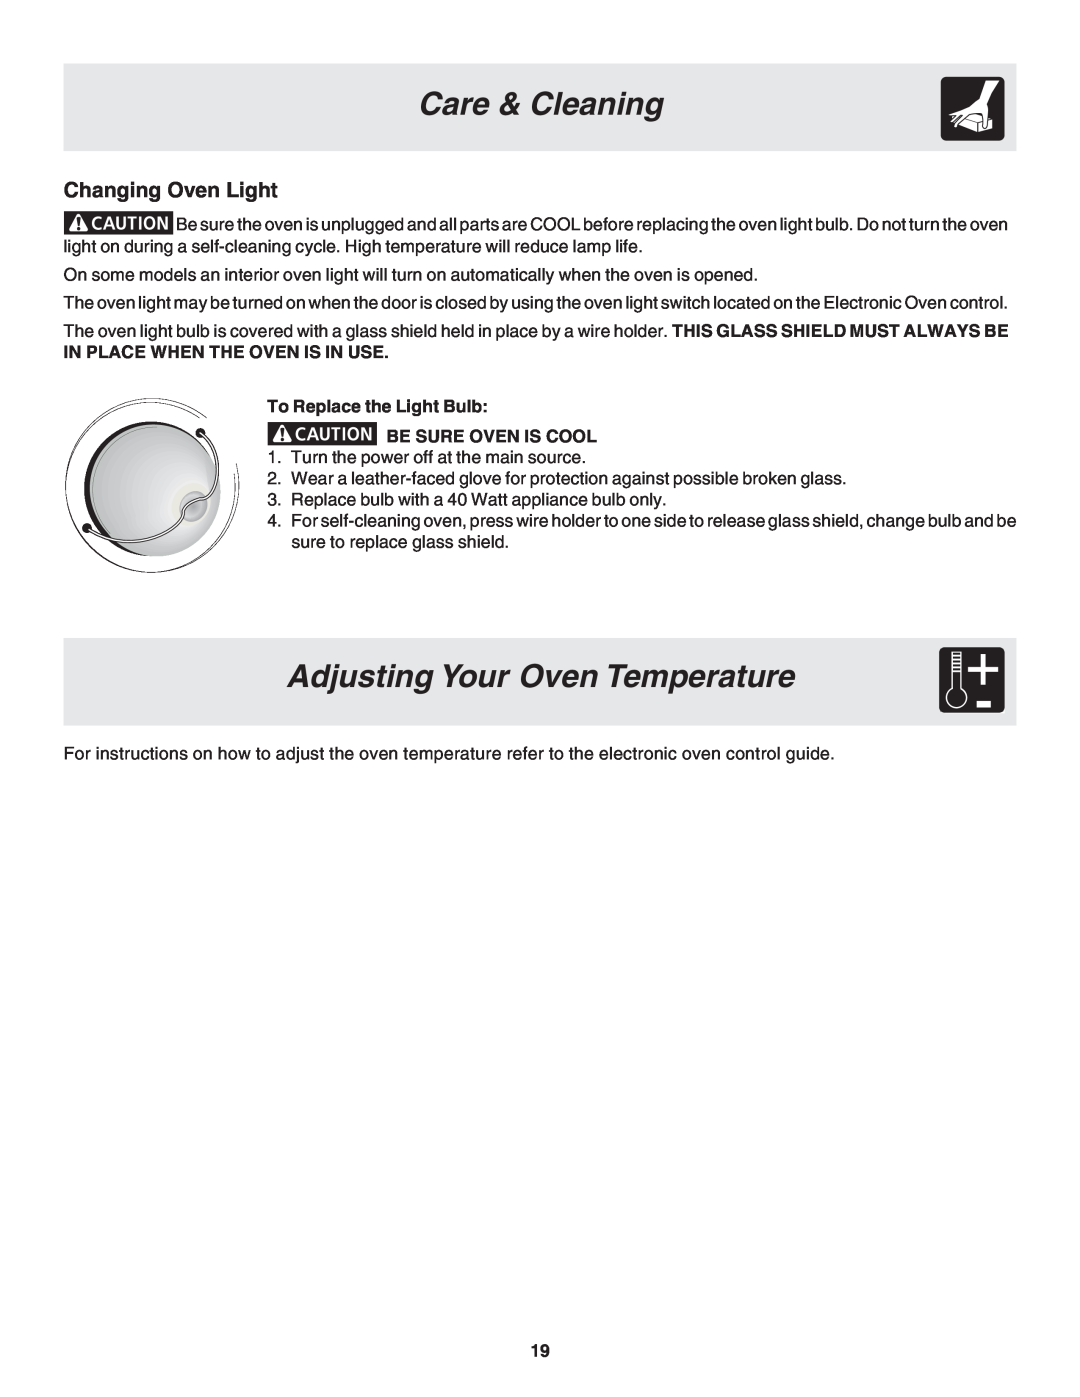 Frigidaire 318203873 manual Adjusting Your Oven Temperature, Care & Cleaning, Changing Oven Light, Be Sure Oven Is Cool 